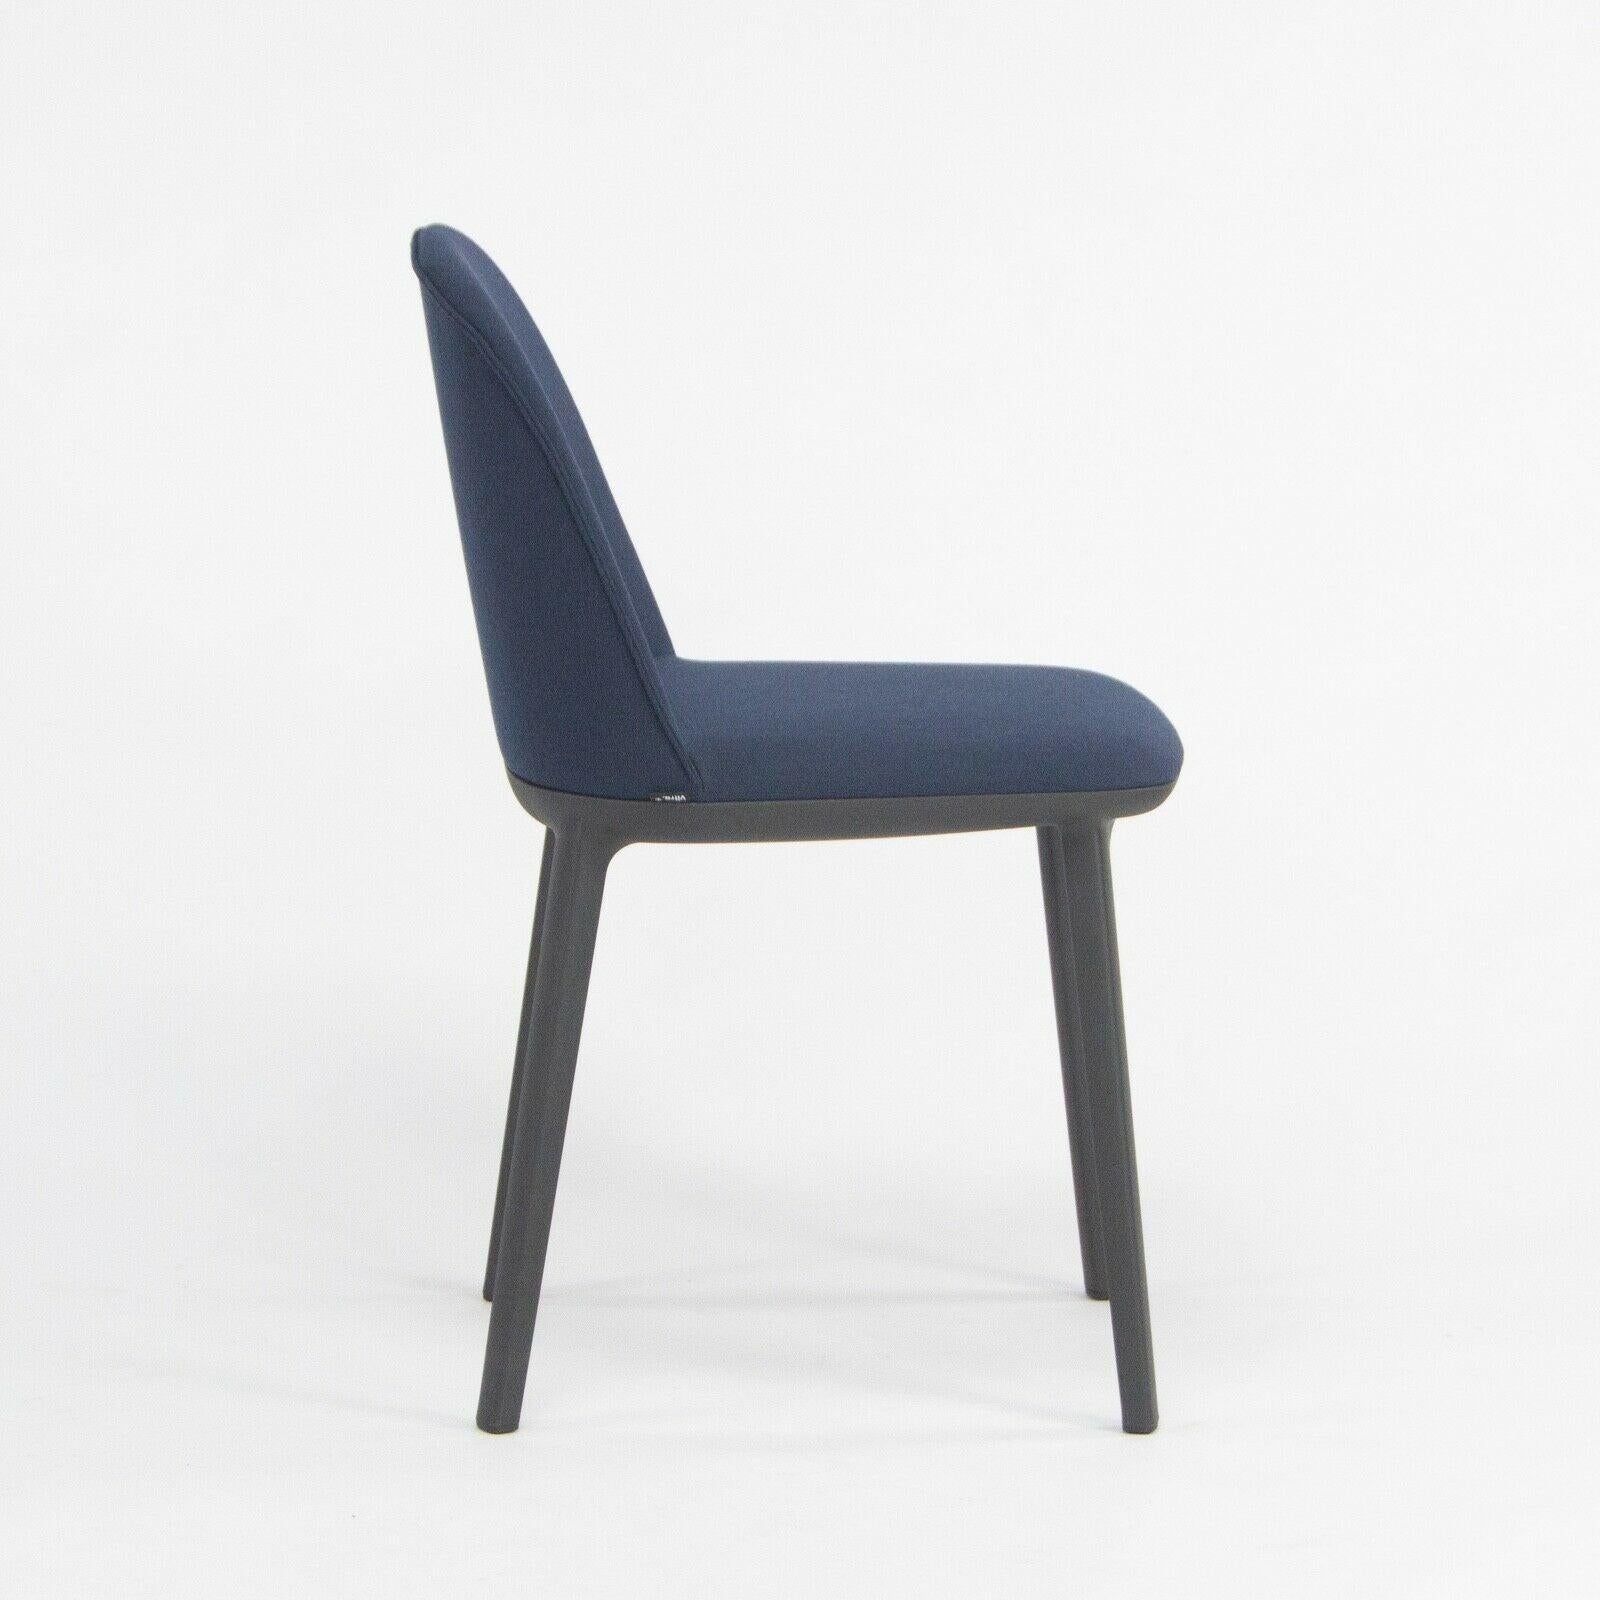 2018 Vitra Softshell Side Chair w/ Dark Blue Fabric by Ronan & Erwan Bouroullec In Good Condition For Sale In Philadelphia, PA